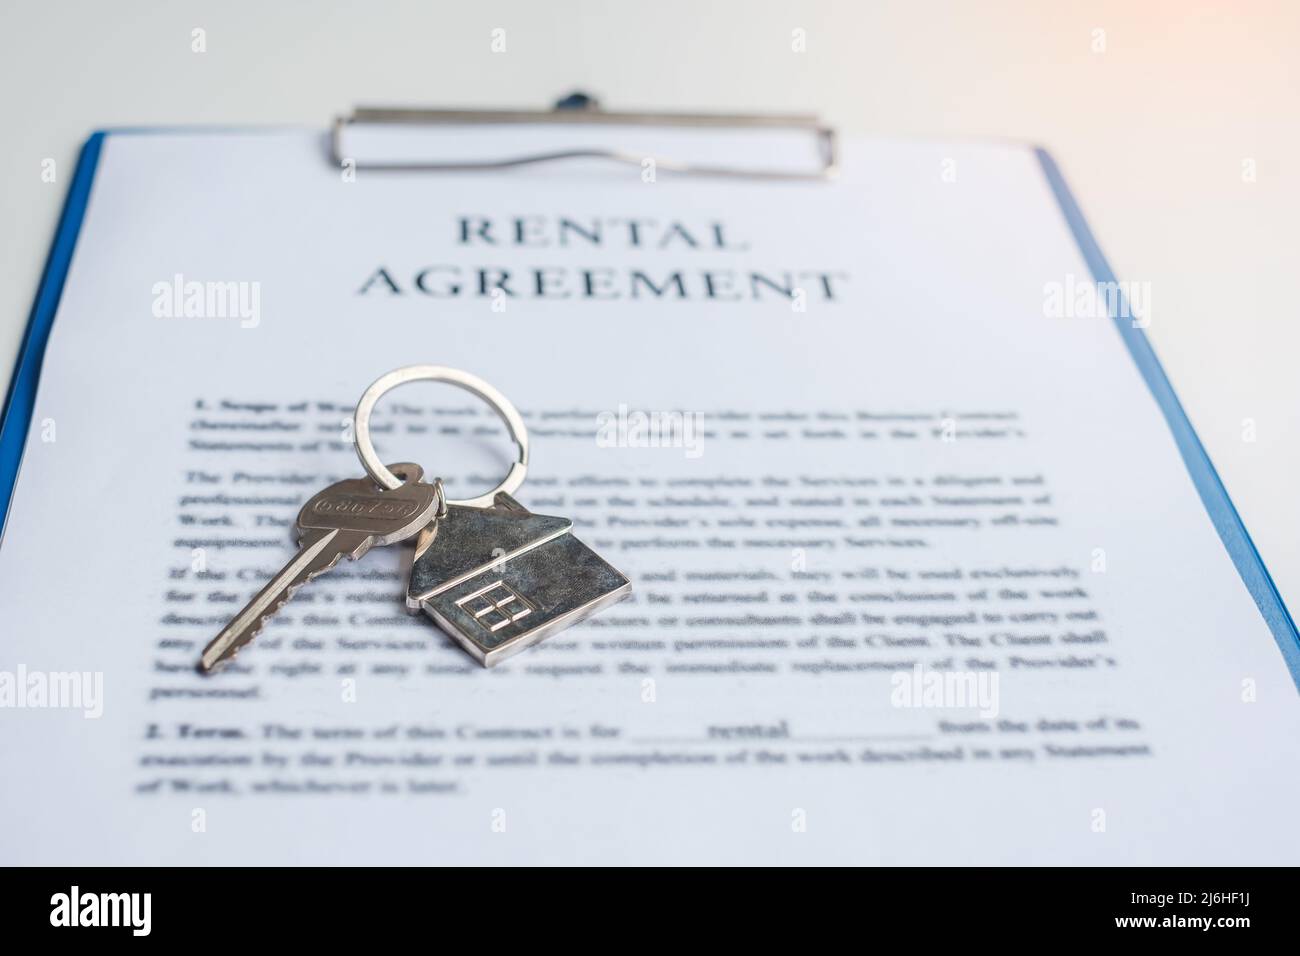 contract documents for signing. Contract agreement, real estate rental, signature, buy and sale and insurance concepts Stock Photo